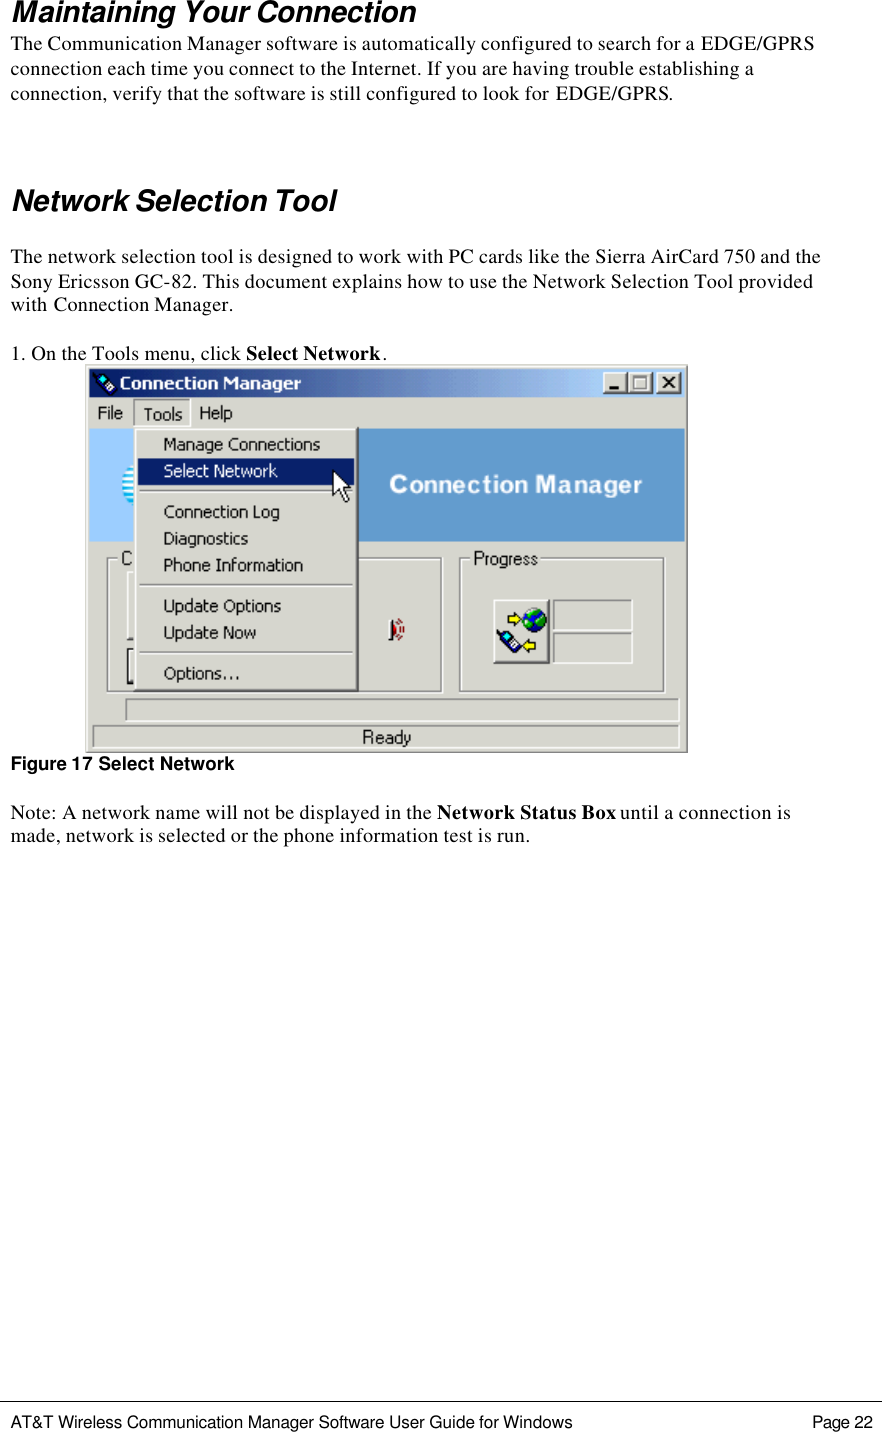   AT&amp;T Wireless Communication Manager Software User Guide for Windows    Page 22  Maintaining Your Connection The Communication Manager software is automatically configured to search for a EDGE/GPRS connection each time you connect to the Internet. If you are having trouble establishing a connection, verify that the software is still configured to look for EDGE/GPRS.  Network Selection Tool  The network selection tool is designed to work with PC cards like the Sierra AirCard 750 and the Sony Ericsson GC-82. This document explains how to use the Network Selection Tool provided with Connection Manager.  1. On the Tools menu, click Select Network.    Figure 17 Select Network  Note: A network name will not be displayed in the Network Status Box until a connection is made, network is selected or the phone information test is run.                        